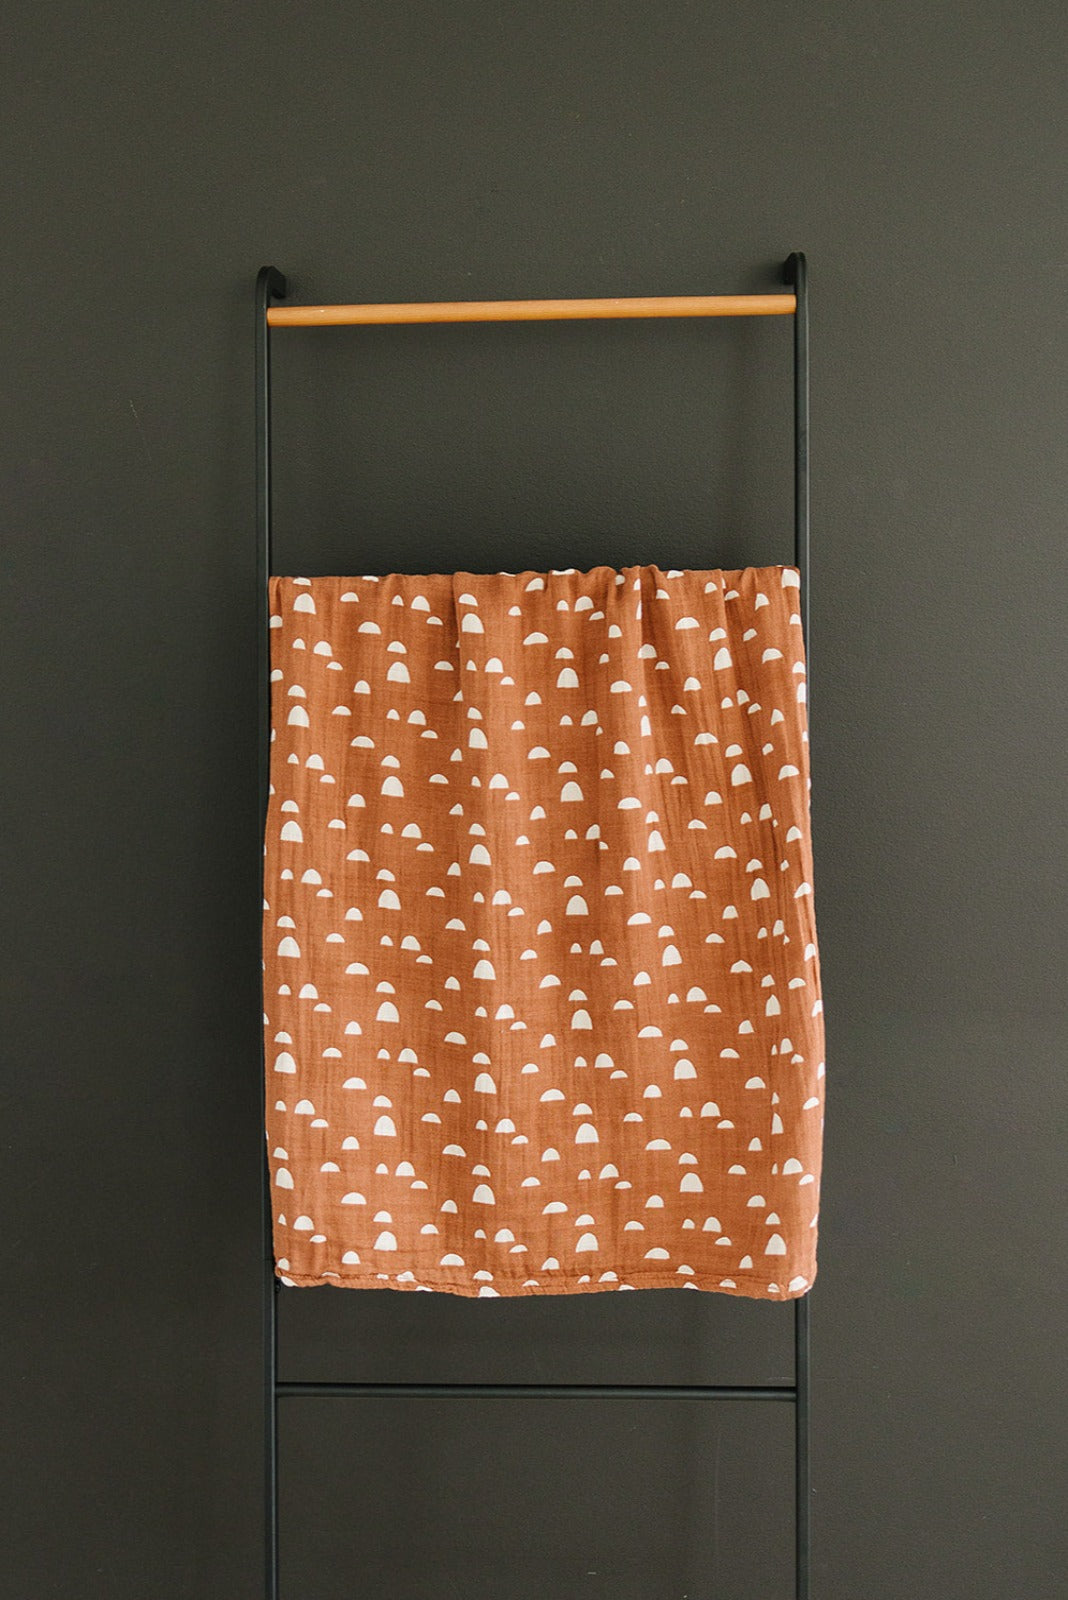 Arches Muslin Swaddle Blanket